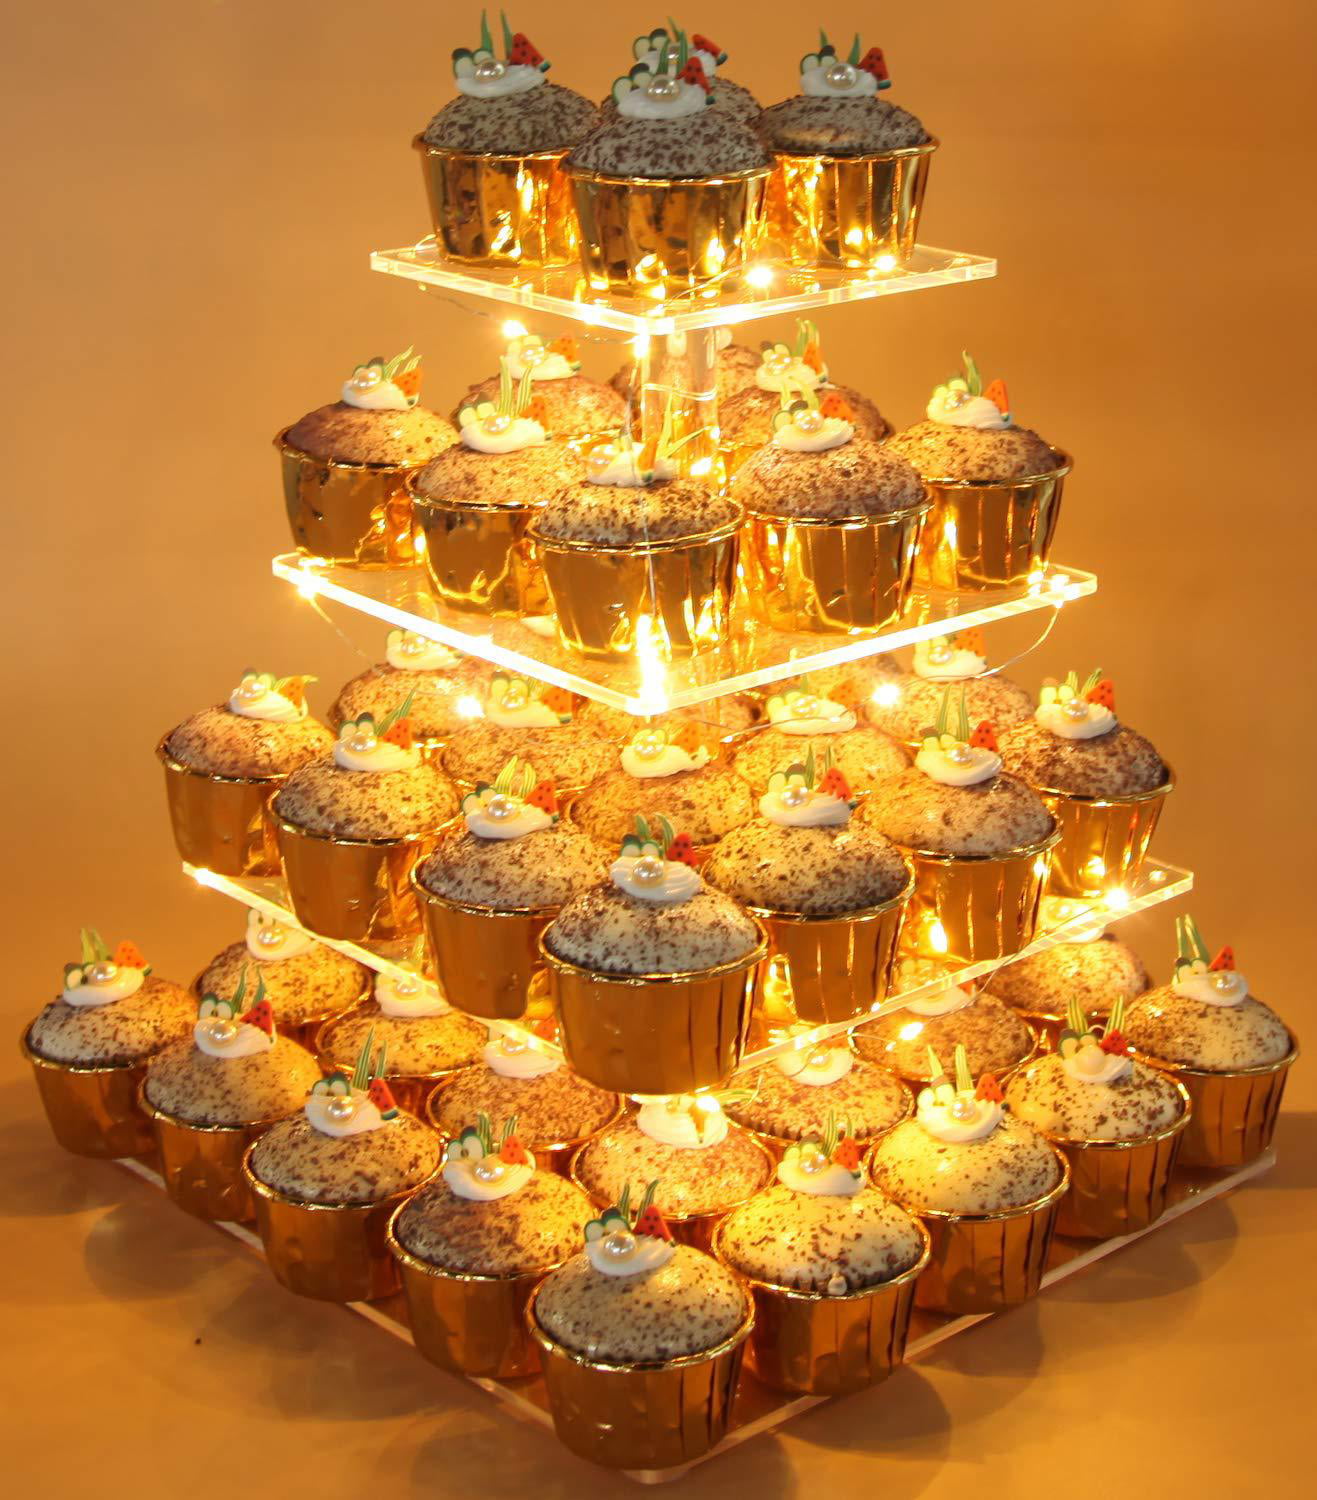 4 Tier Acrylic Cupcake Display Stand with LED String